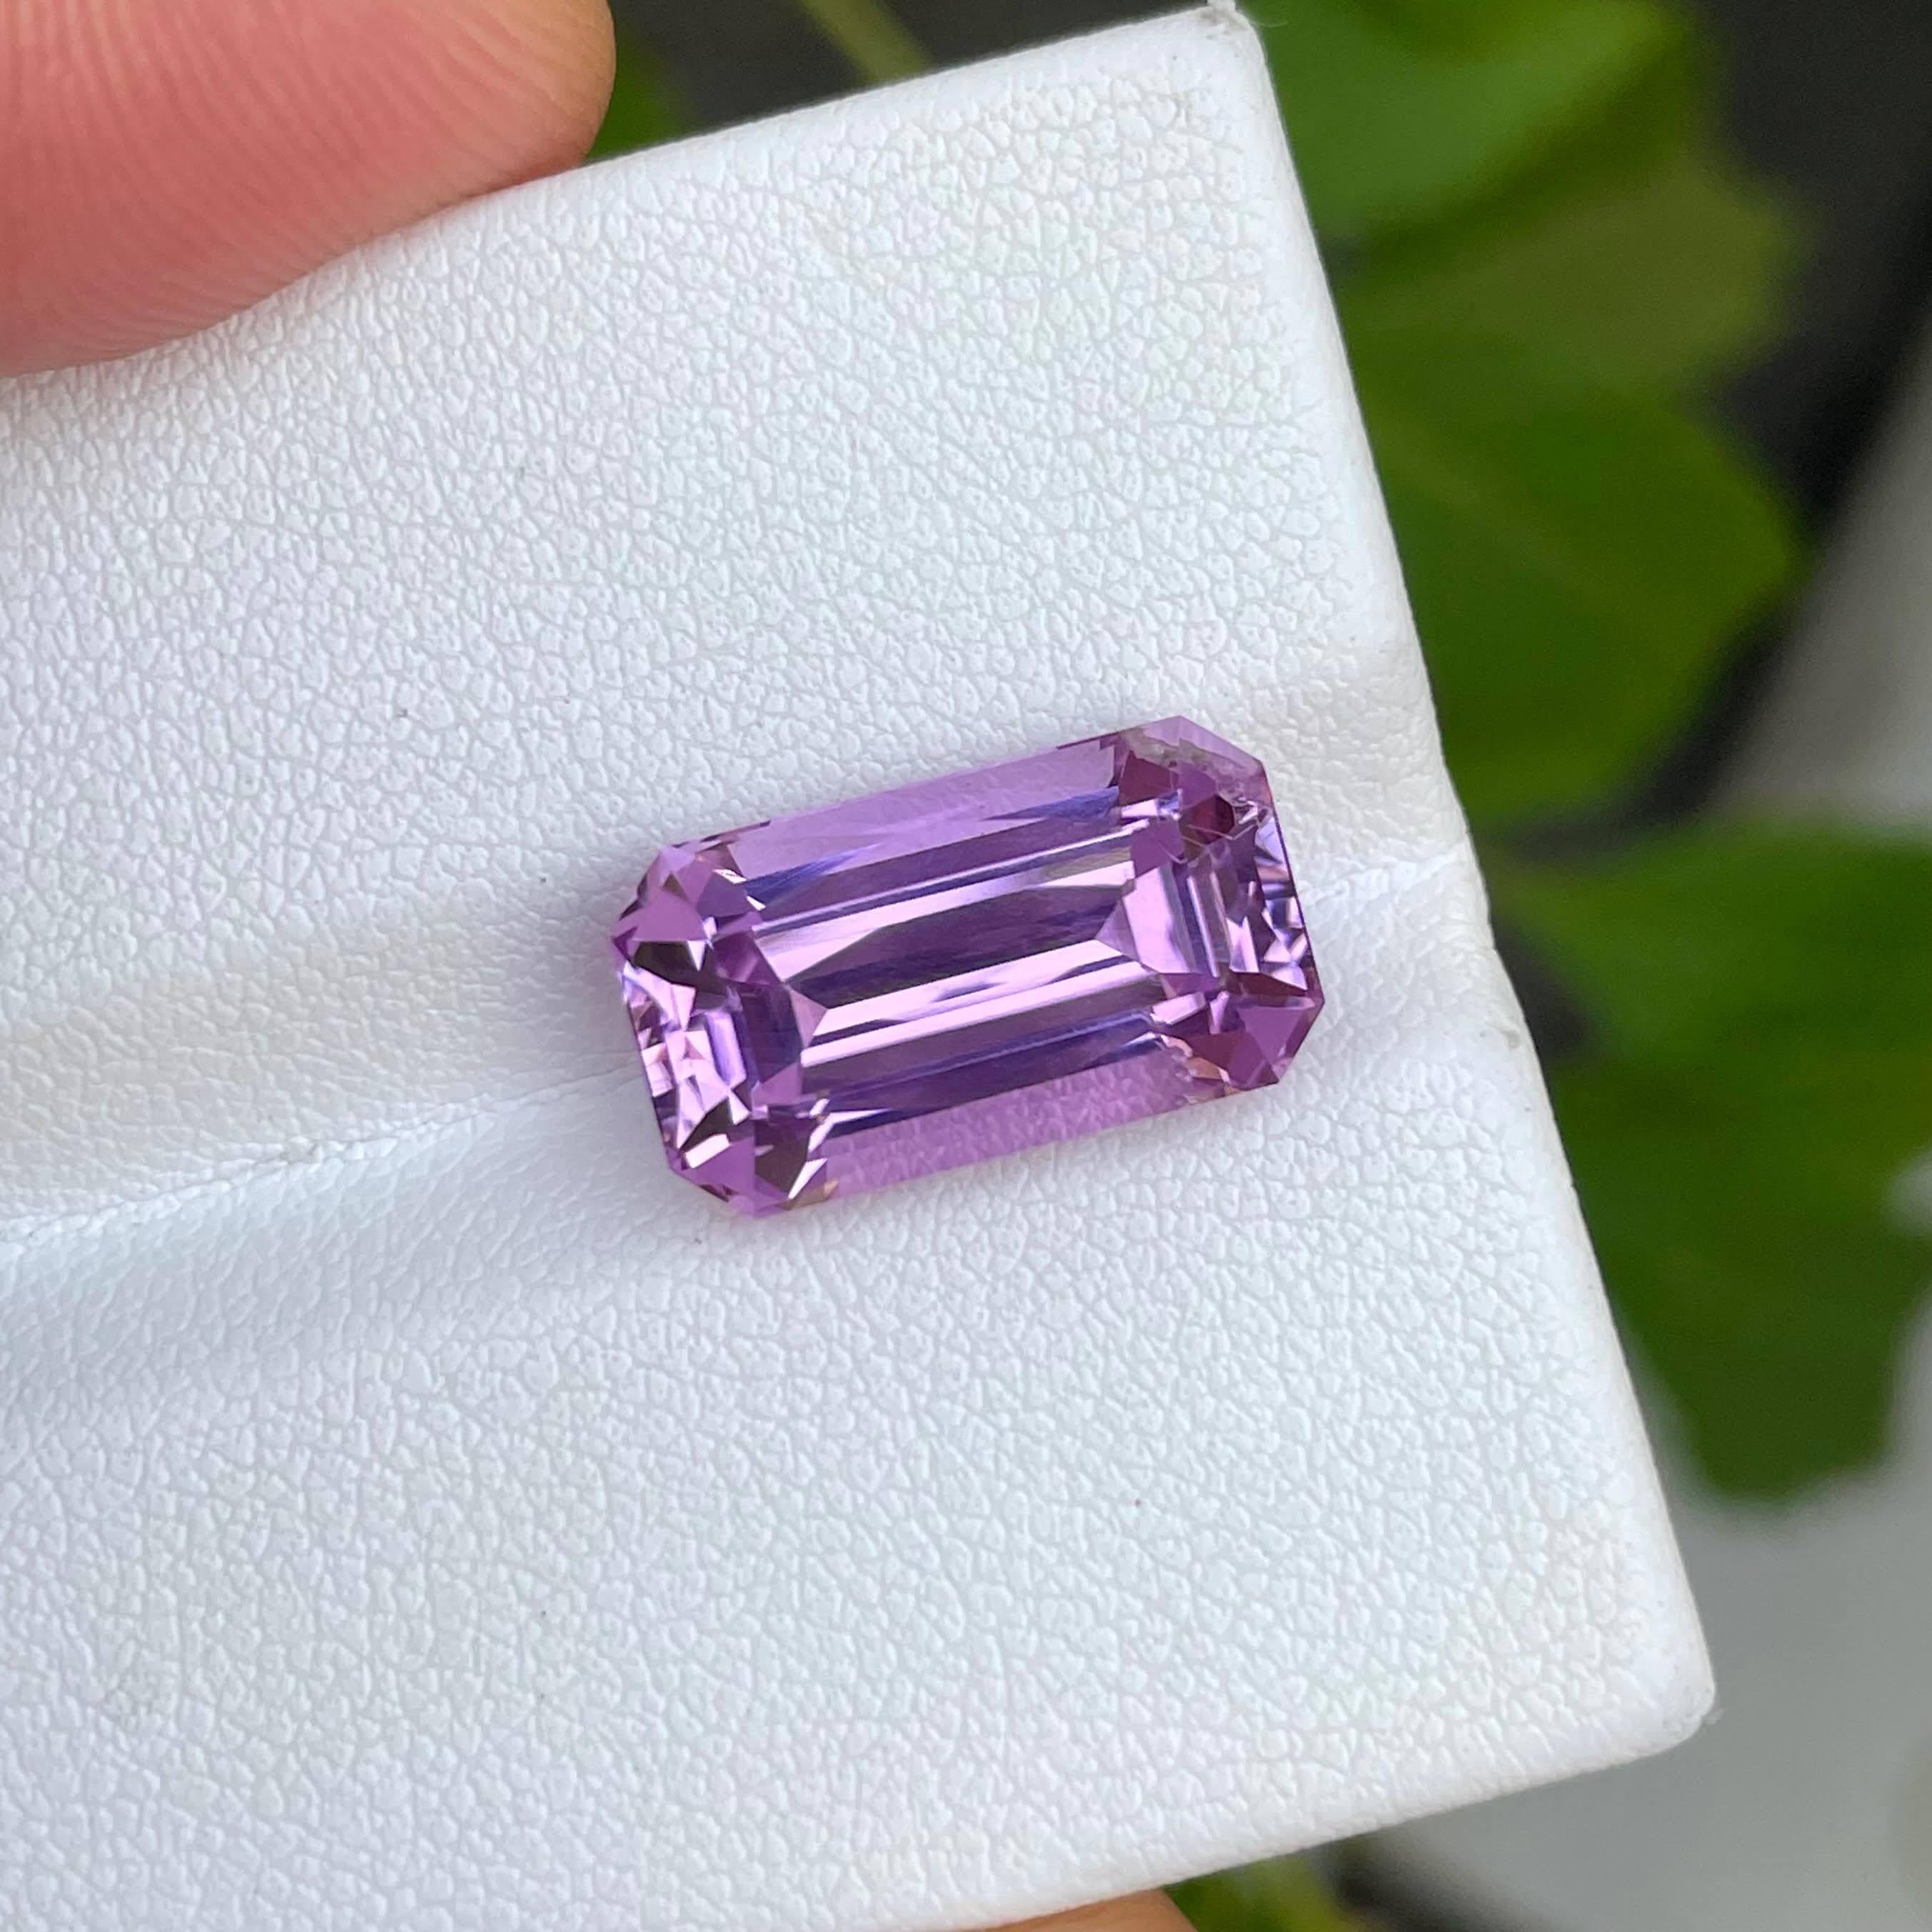 Weight 9.0 carats 
Dimensions 15.2x8.61x7.7 mm
Treatment none 
Origin Nigeria 
Clarity VVS
Shape octagon 
Cut emerald 




The 9.0 carat Purple Kunzite stone, characterized by its enchanting emerald cut, is a stunning natural gemstone sourced from